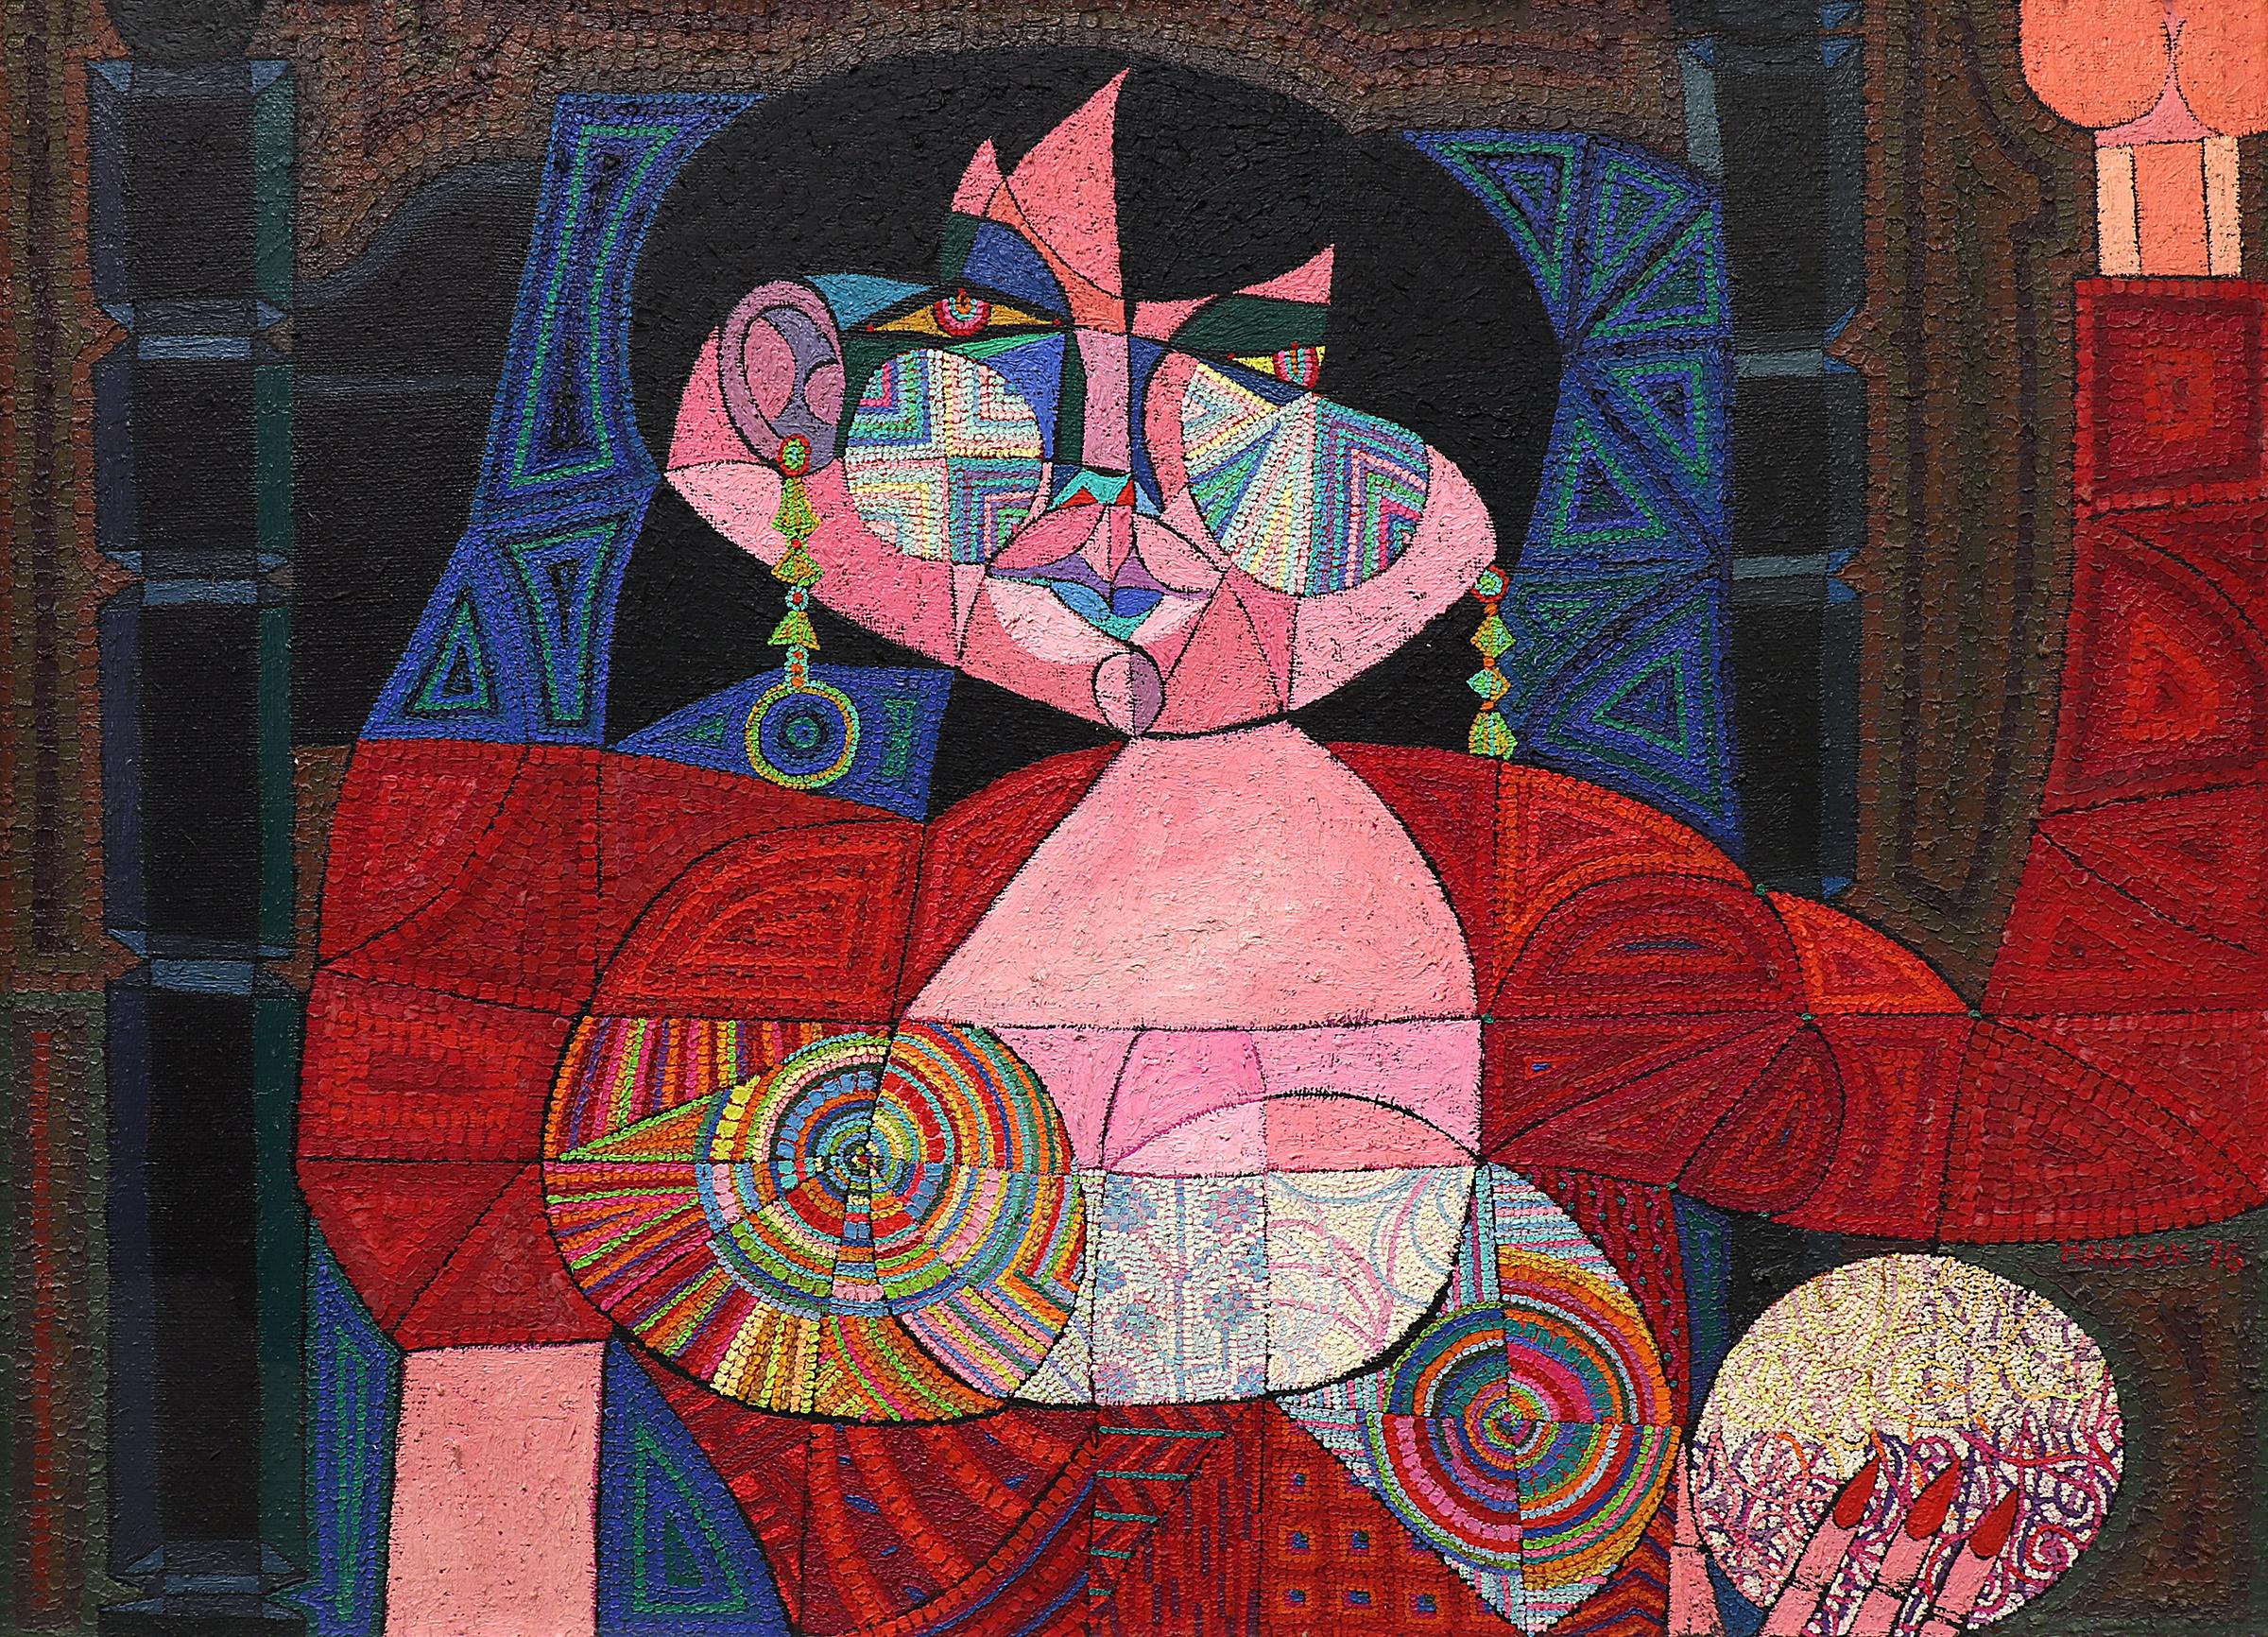 Semi-Abstract figurative oil on burlap painting titled 'Sybil (The Prophetess)' by Edward Marecak (1919-1993) painted in 1976. Signed and dated by the artist in the lower right corner. Portraying a single figure holding a crystal ball in their hand,